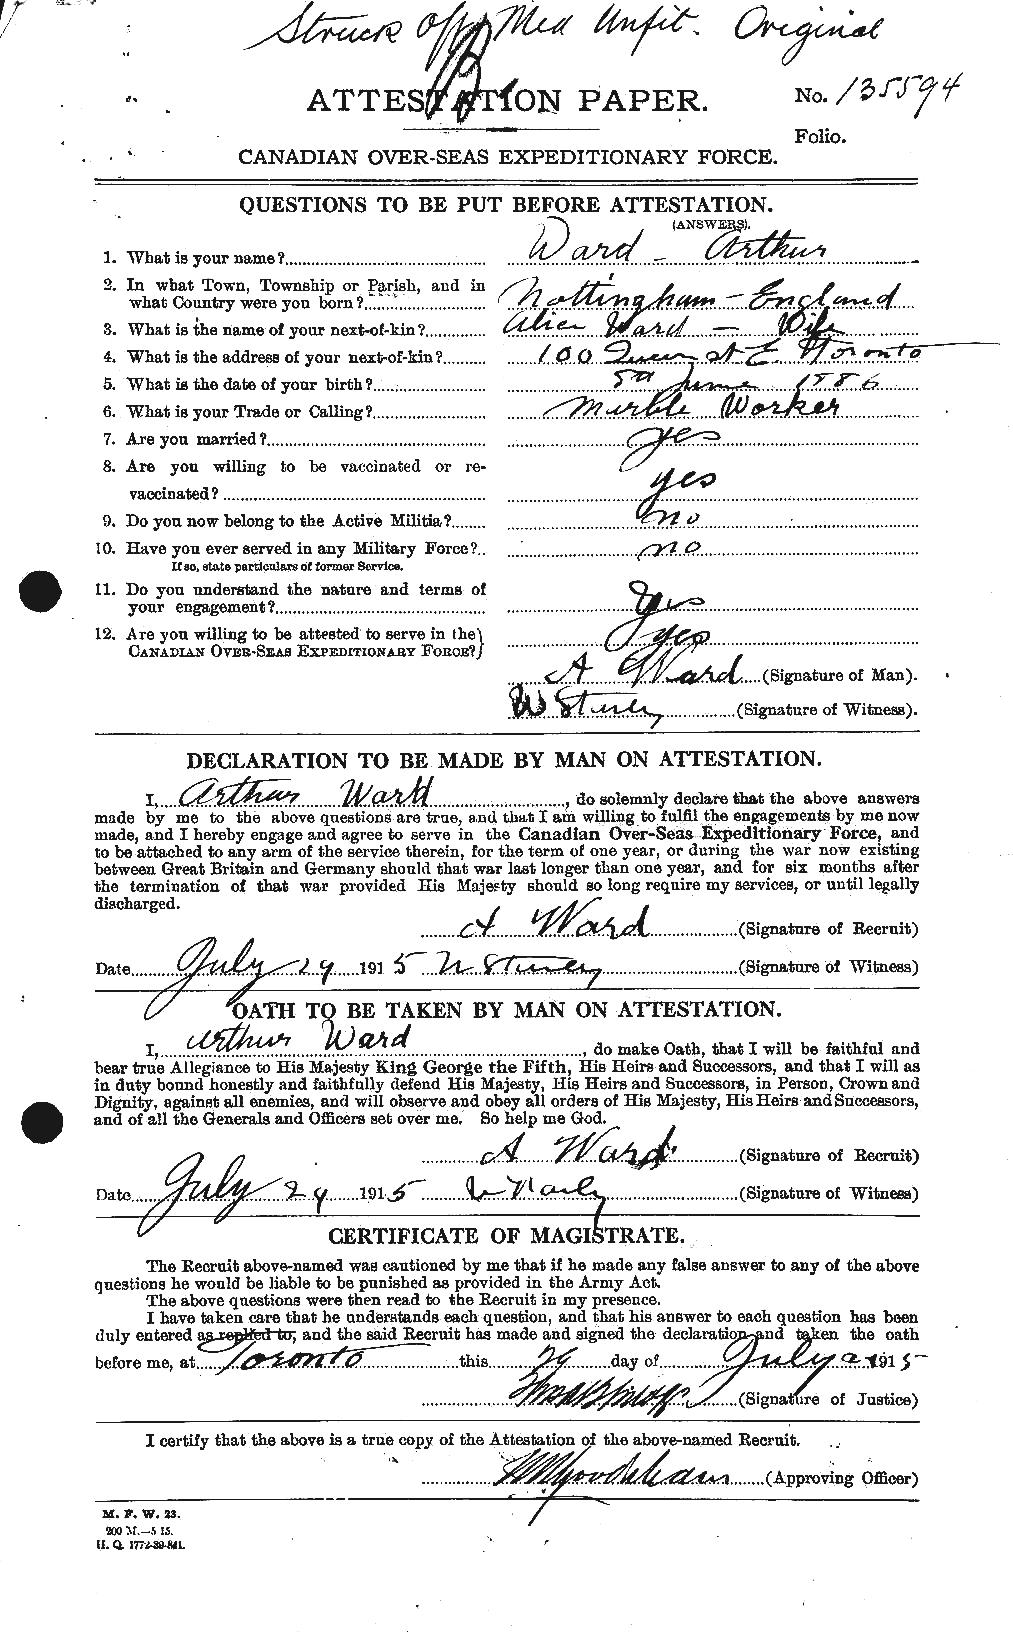 Personnel Records of the First World War - CEF 655145a